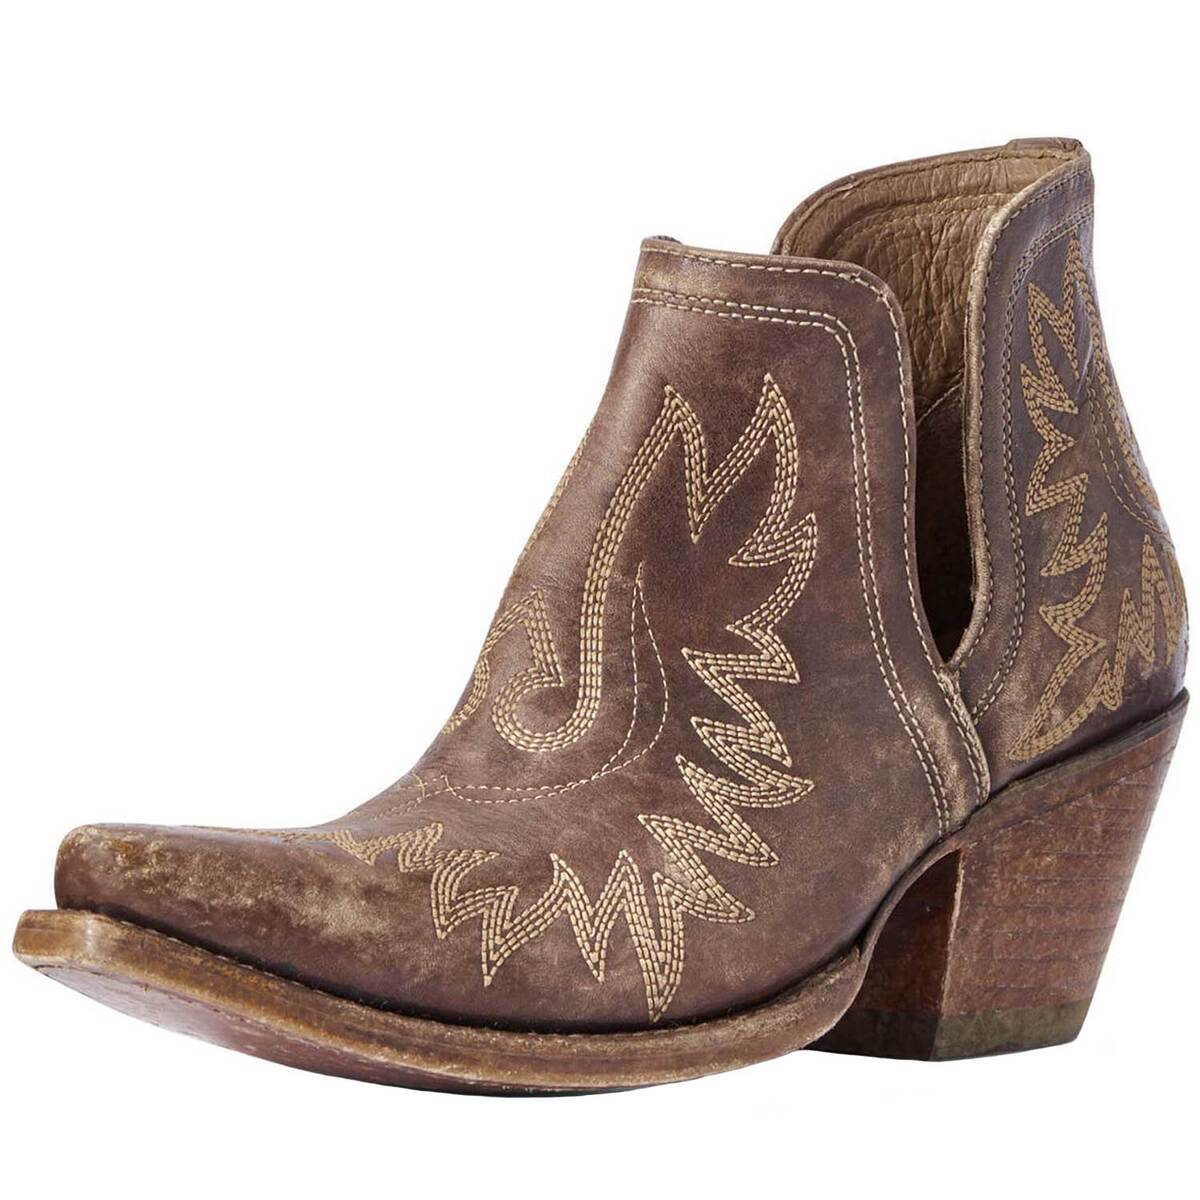 Ariat Women's Dixon Western Boots - Distressed Brown - Size 7